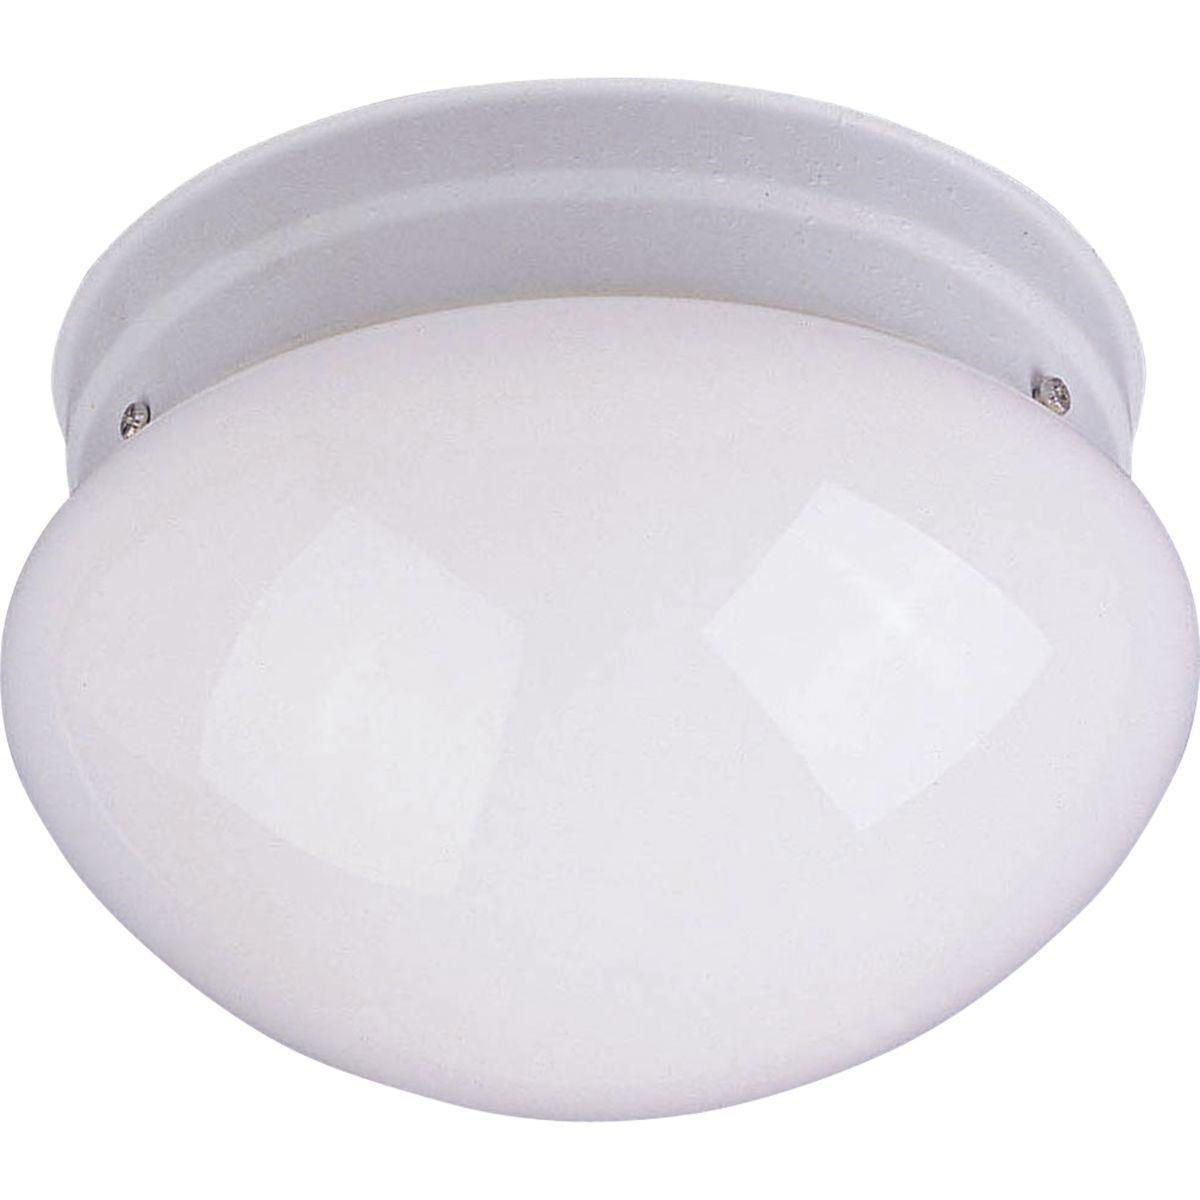 Essentials-588x 9 in. 2 Lights Ceiling Puff Light with clear glass